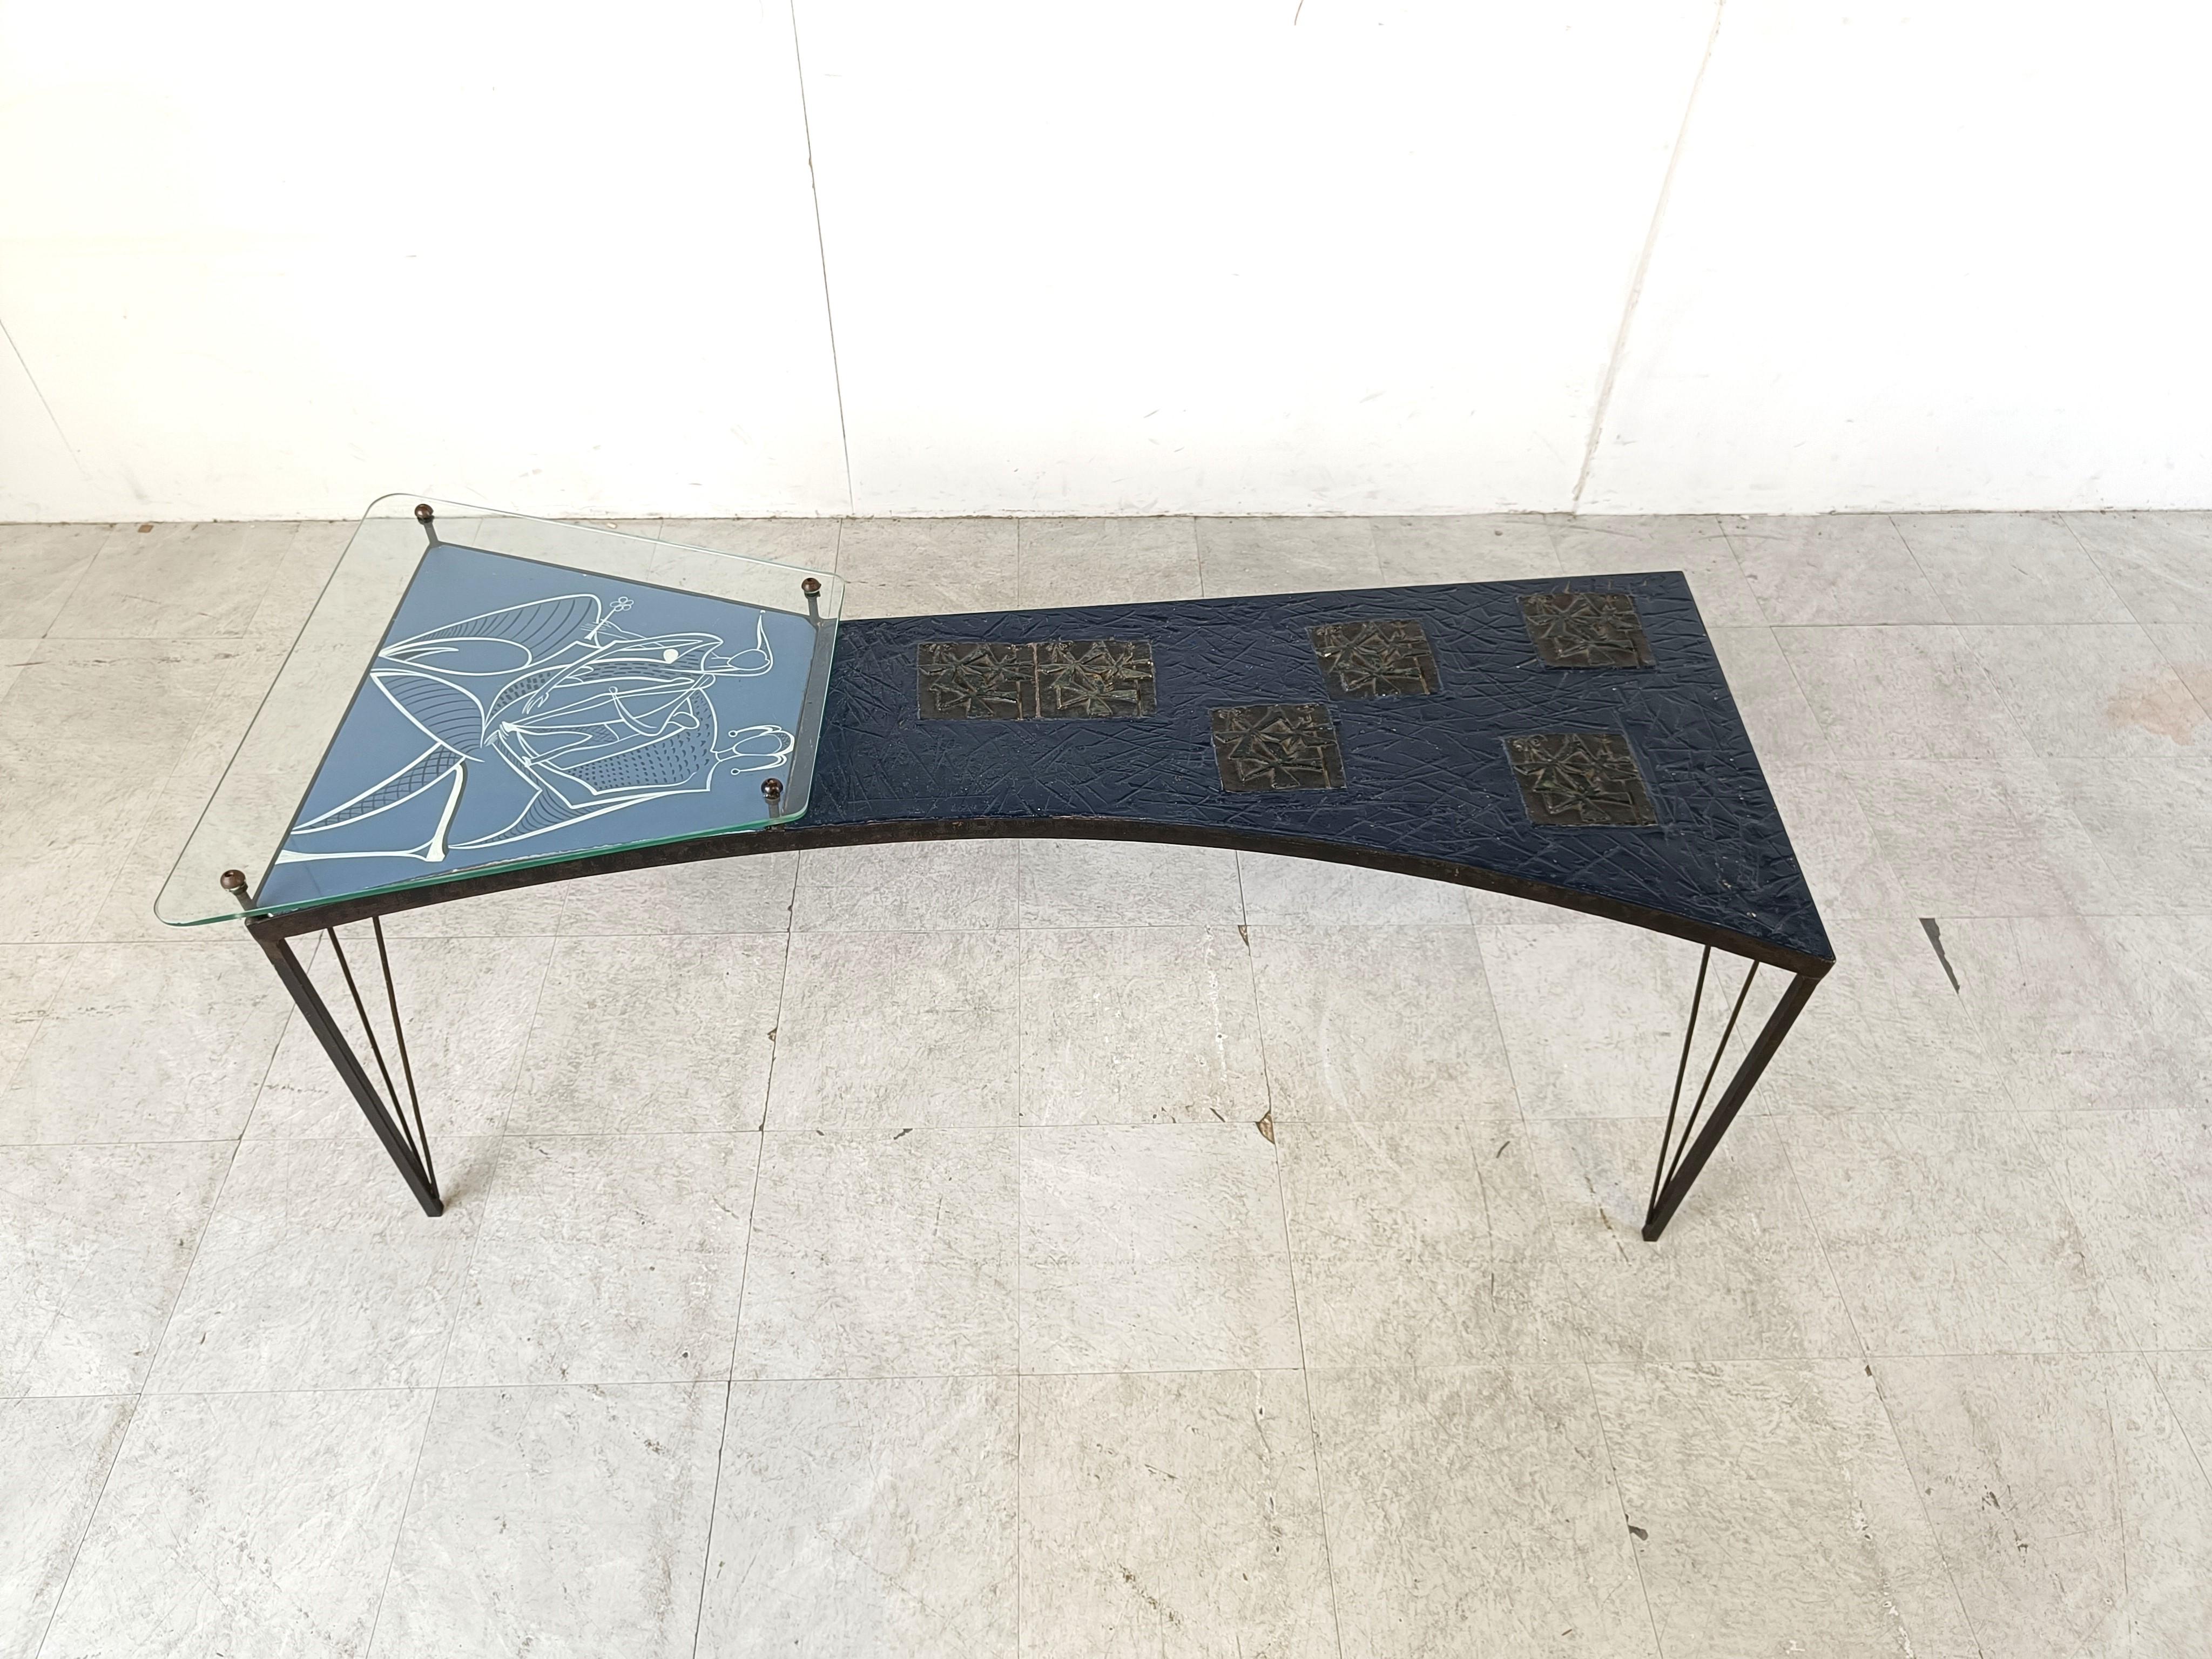 Vintage sculptural coffee table consisting of 4 black metal legs, a sculpted resin table top, a wooden panel with a minimalist artwork and a glass shelf.

Very unique mid century coffee table by unknown artist.

1950s - France

Good